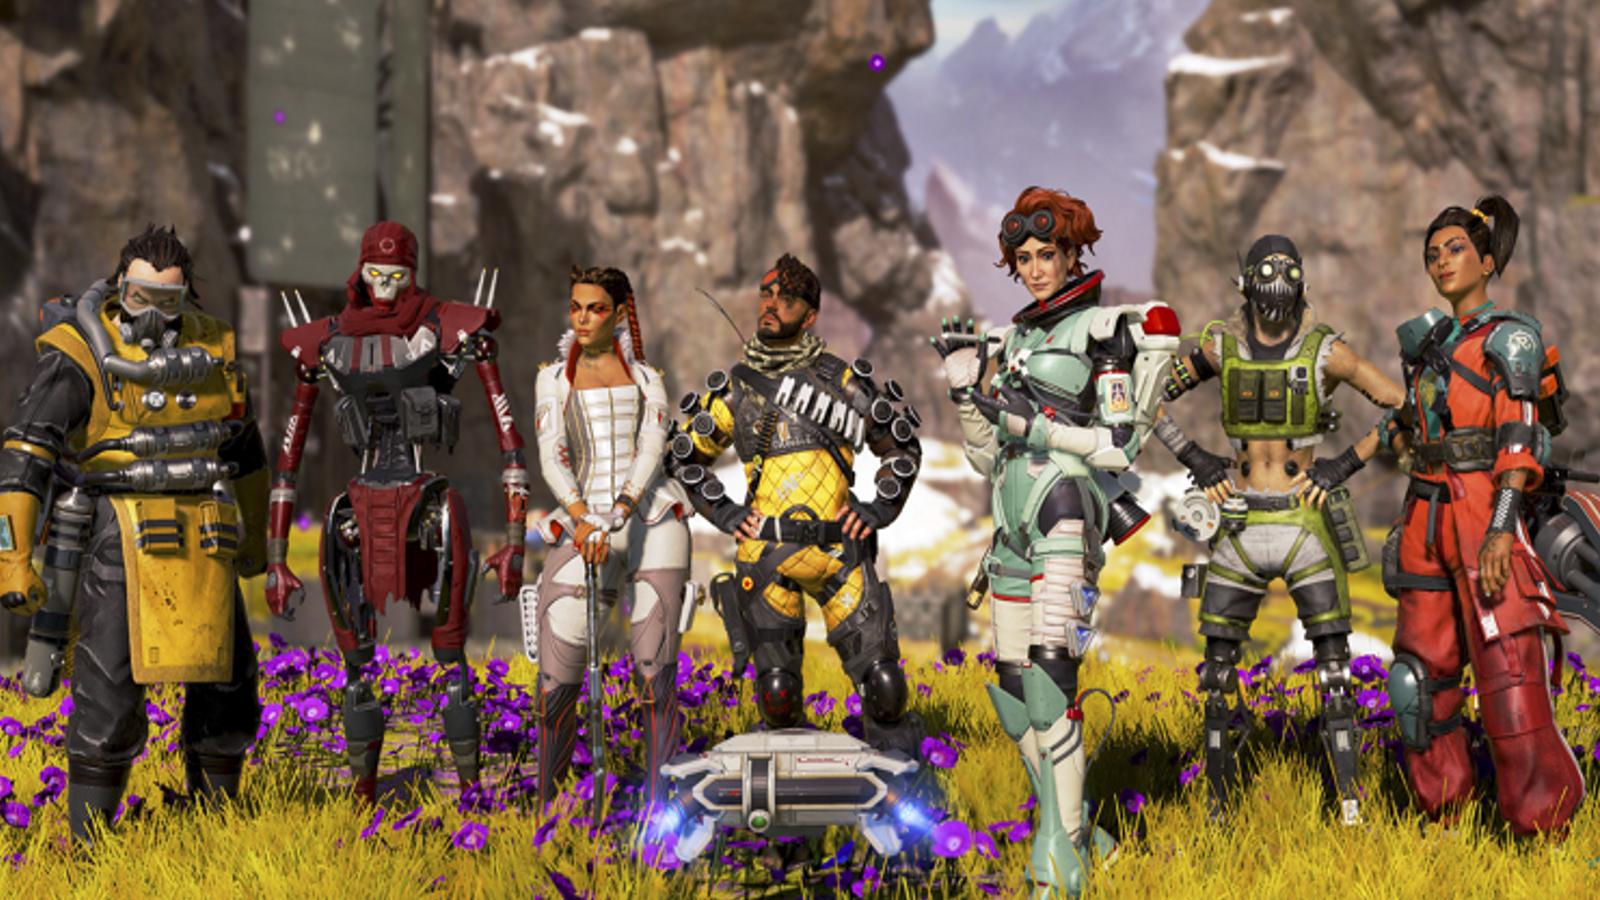 Apex Legends characters standing in unity.